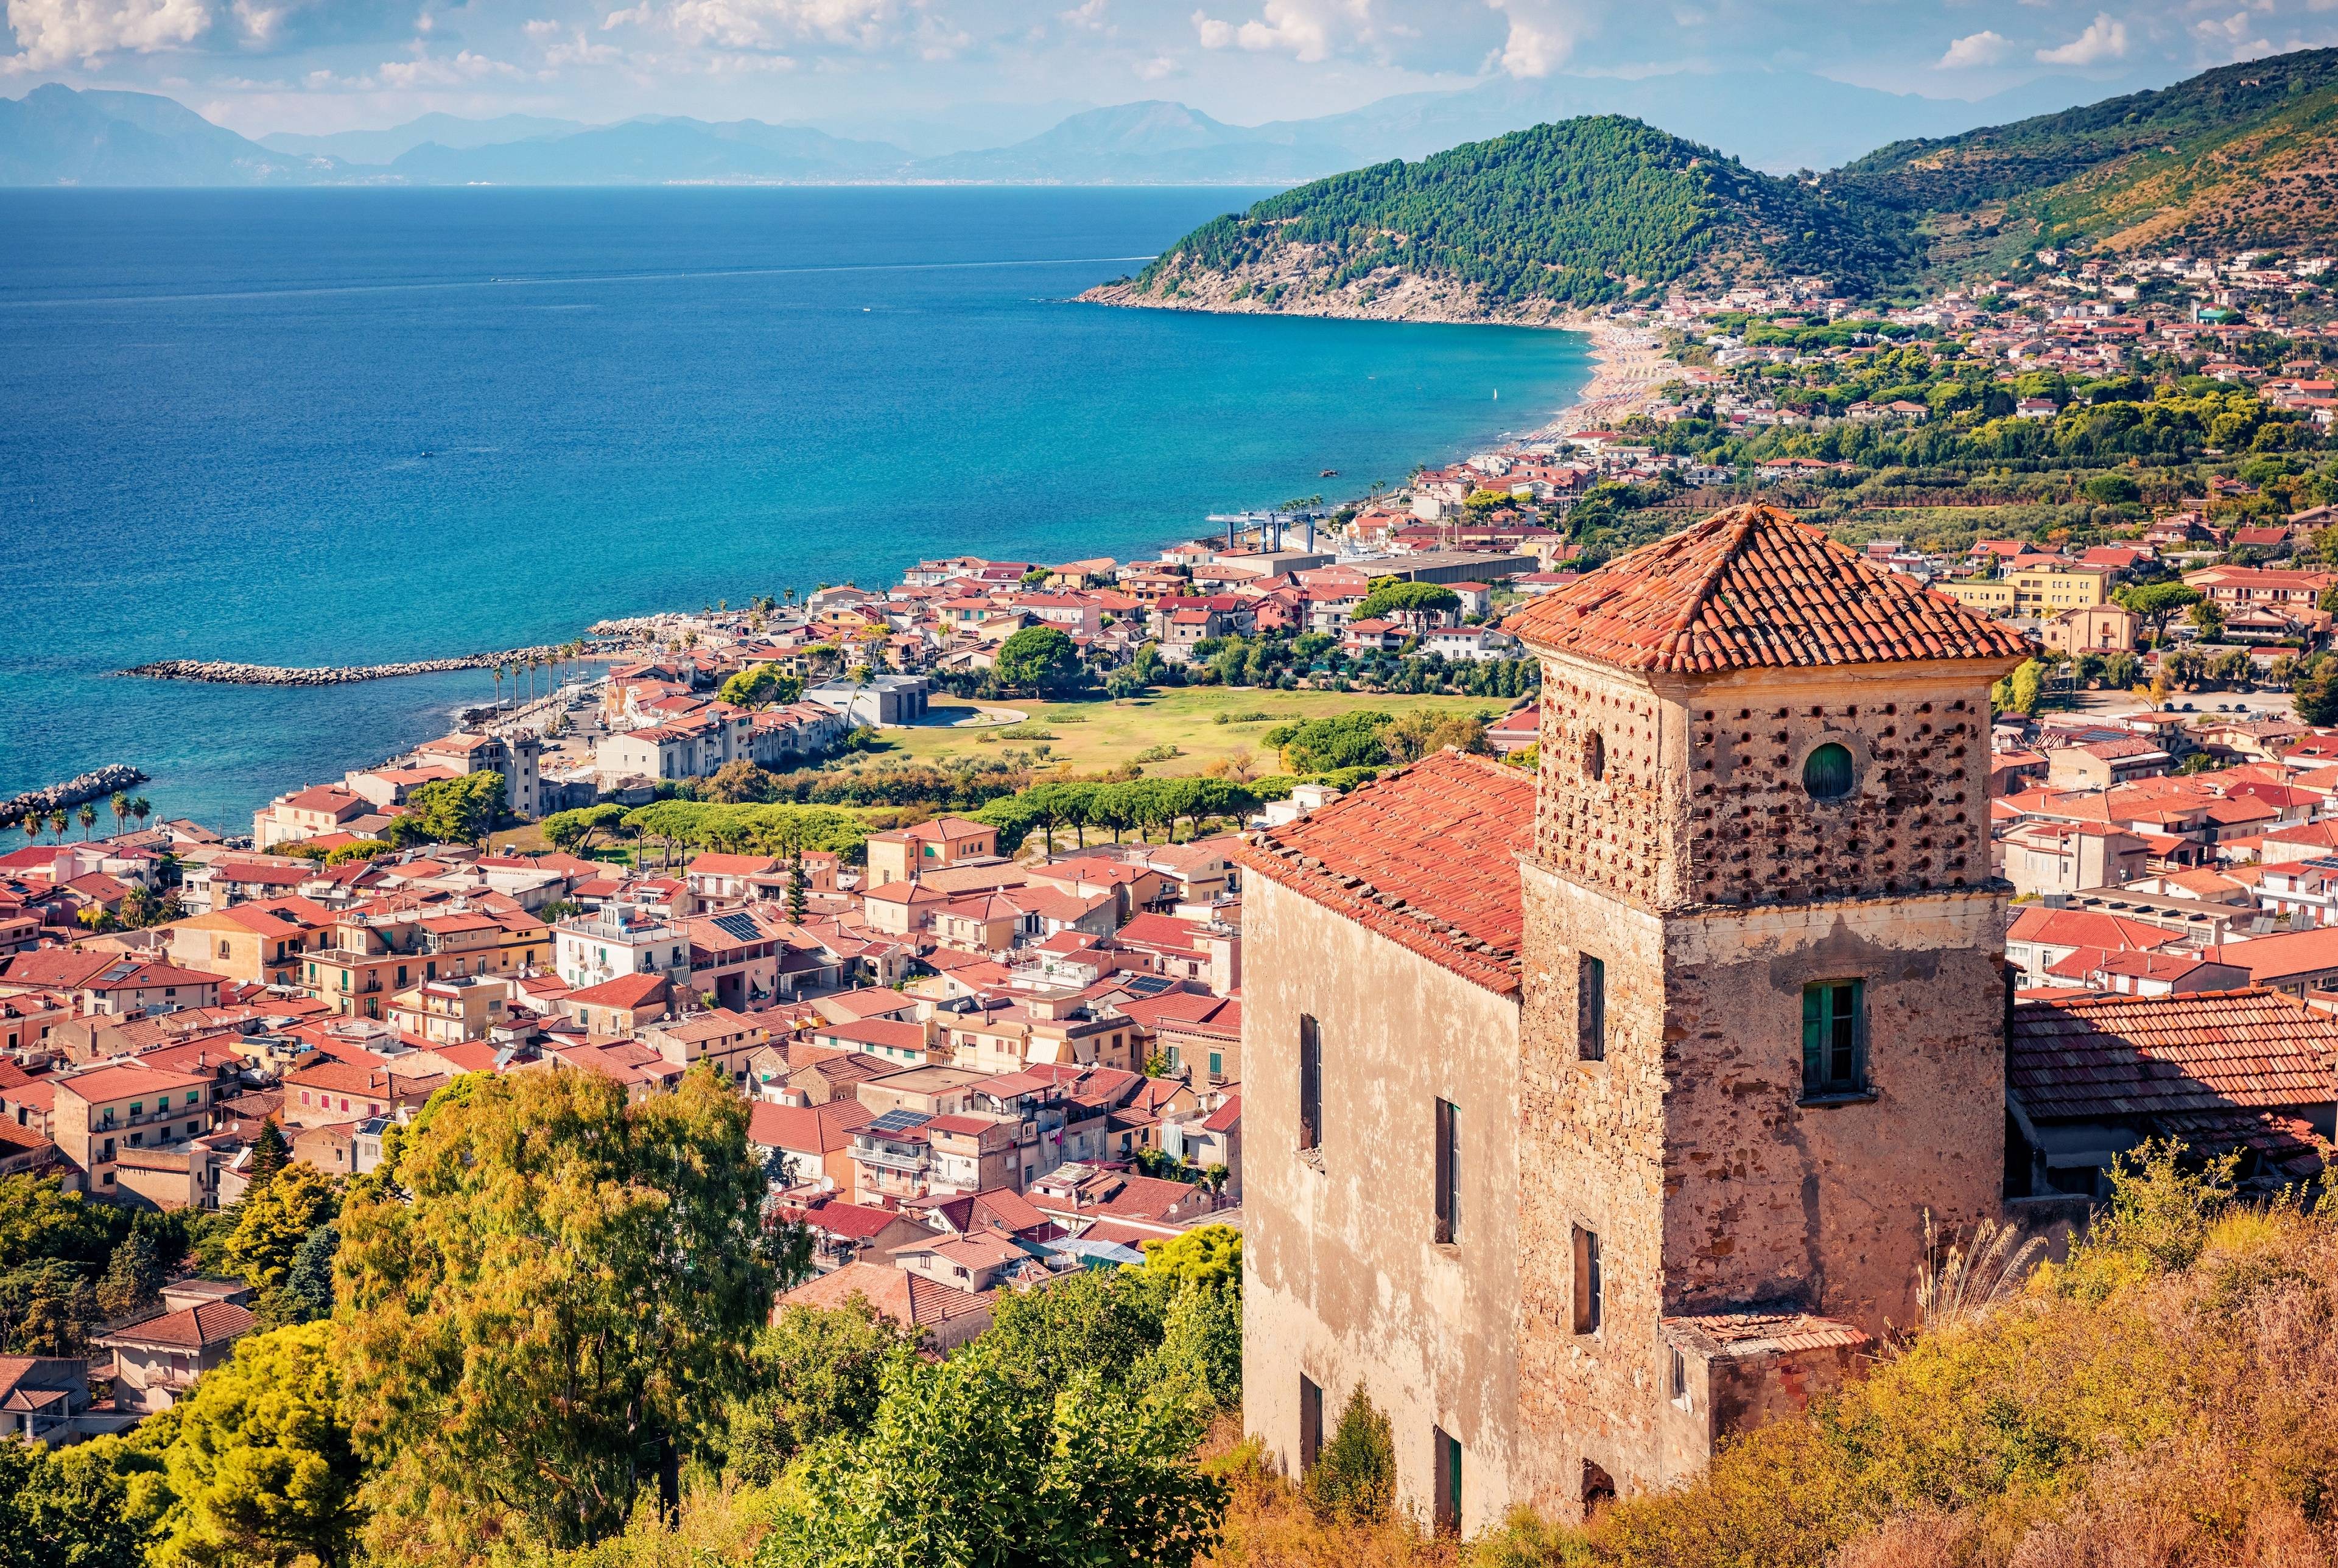 Explore the Cilento, Home to the Charming Medieval Mountaintop Hideaway of Castellabate